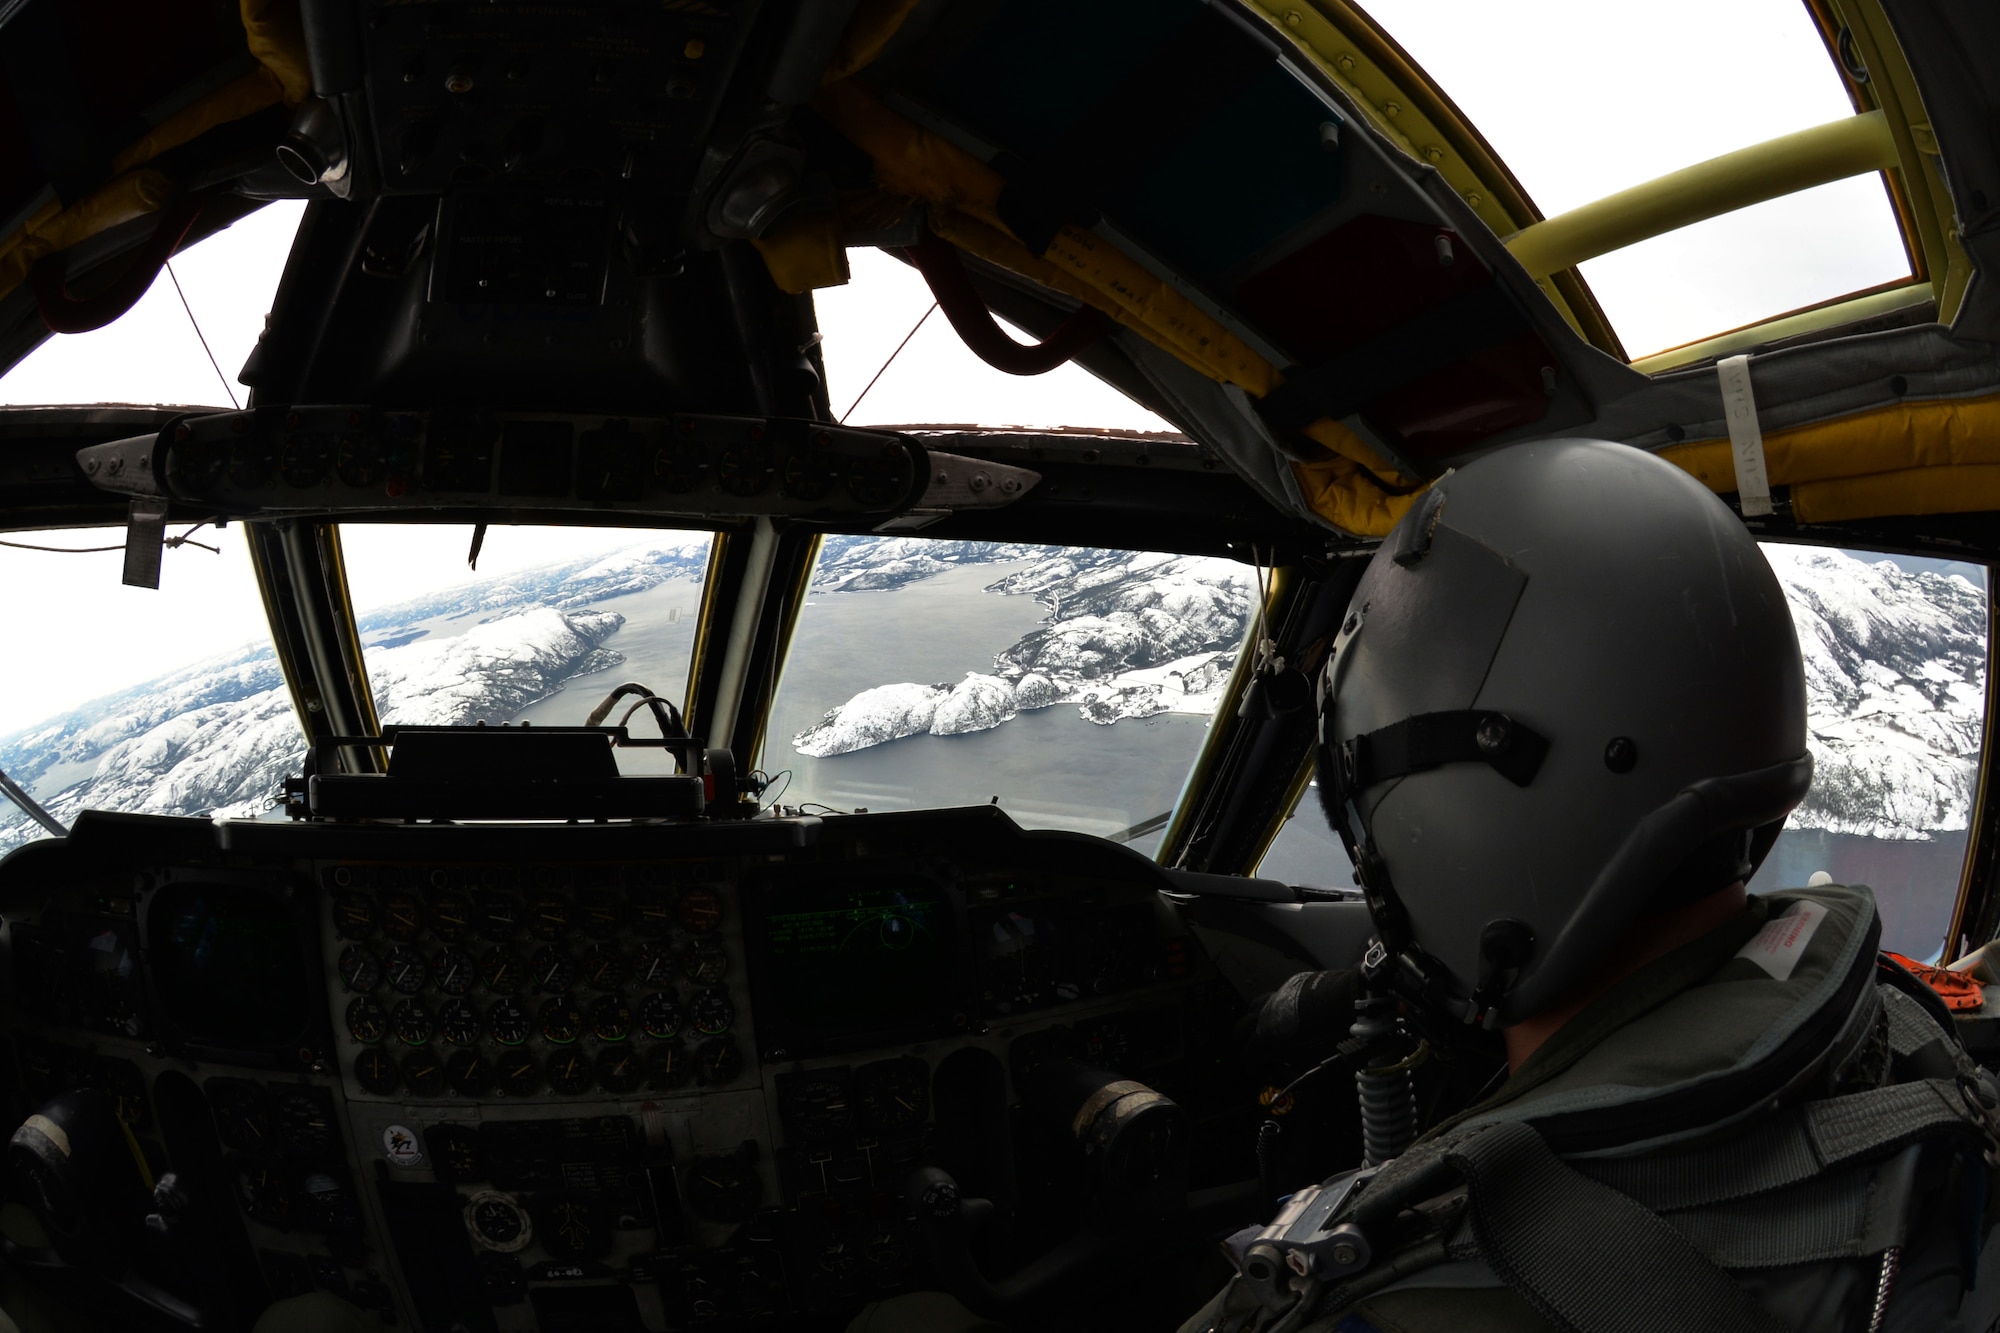 A B-52 Stratofortress flies a mere 1,000 feet off the deck over a fjord in central Norway, March 1, 2016. The B-52 worked with Norwegian joint-tactical air controllers to conduct highly-accurate virtual strikes on enemy positions during exercise Cold Response 16, a biennial NATO training exercise. Norway, the U.S. and other NATO allies participated in the exercise, engaging in maritime, ground and air operations. (U.S. Air Force photo/Senior Airman Joseph Raatz)